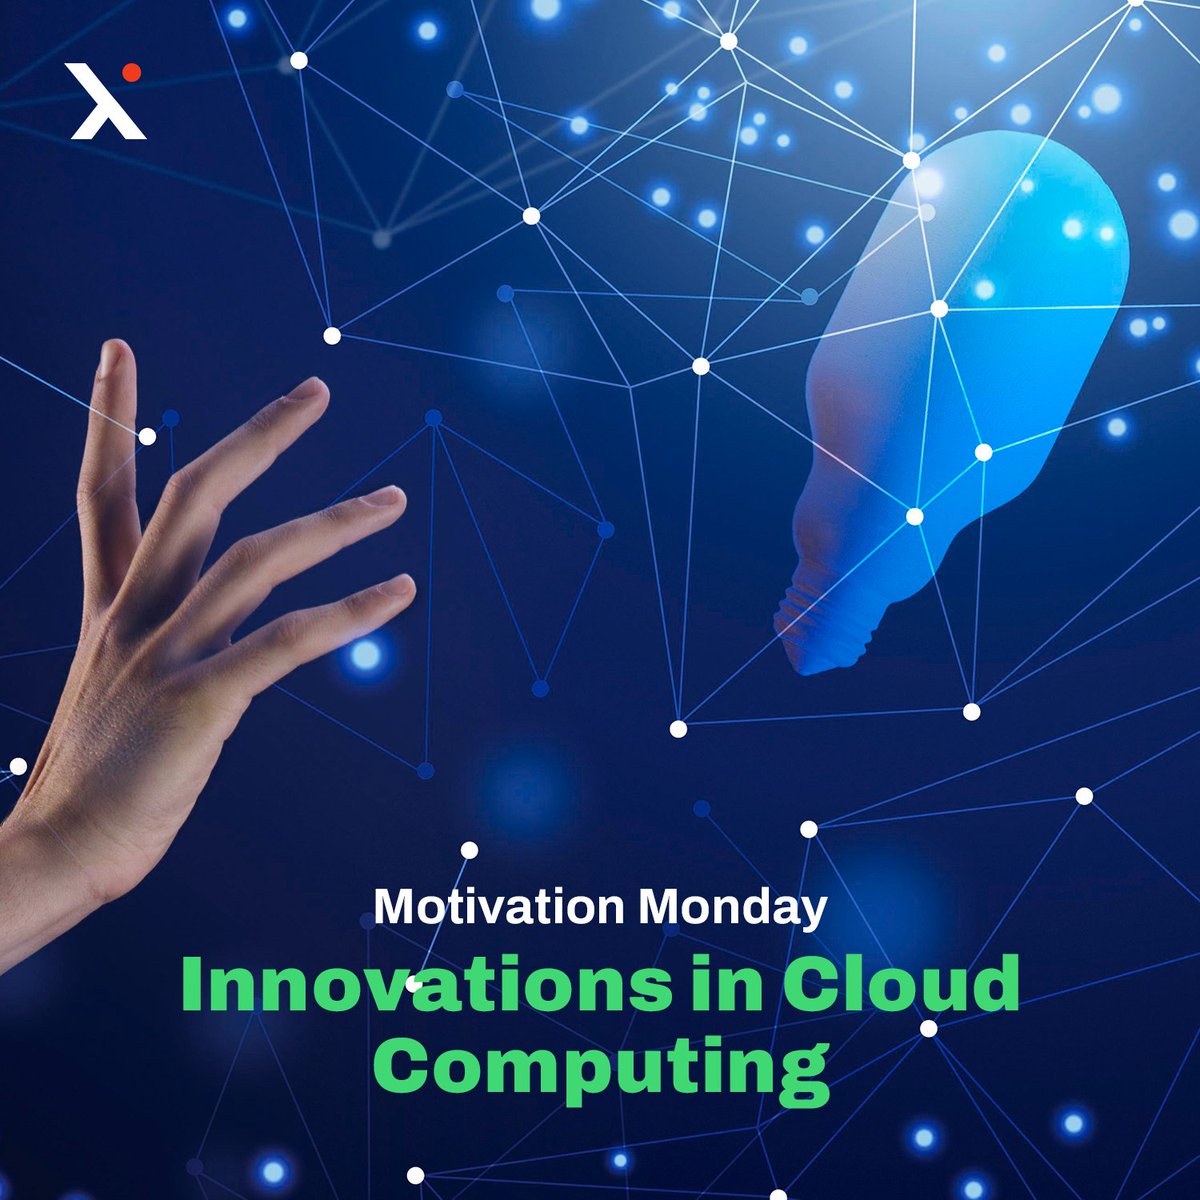 1/5 Learn How Cloud Computing Innovations Can Propel Your Business.

Several exciting innovations are emerging in cloud computing that are transforming the way businesses operate. These innovations include:

Serverless computing: Serverless computing allows businesses to...